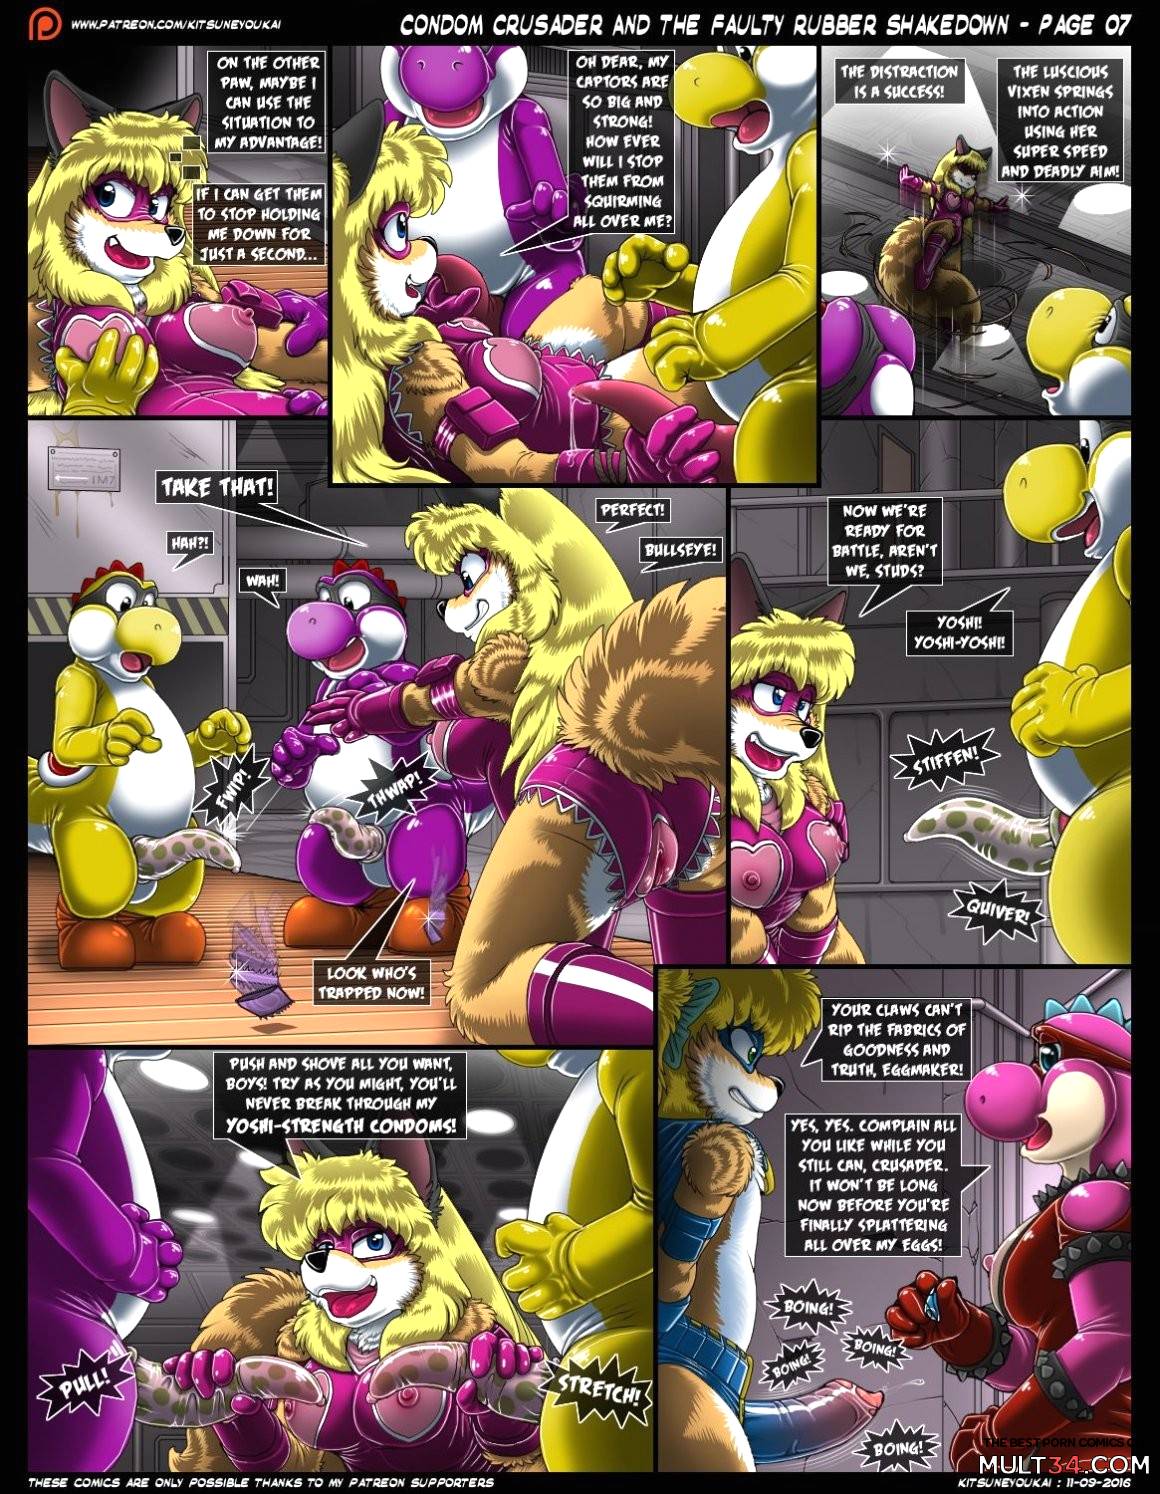 Condom Crusader And The Faulty Rubber Shakedown page 8